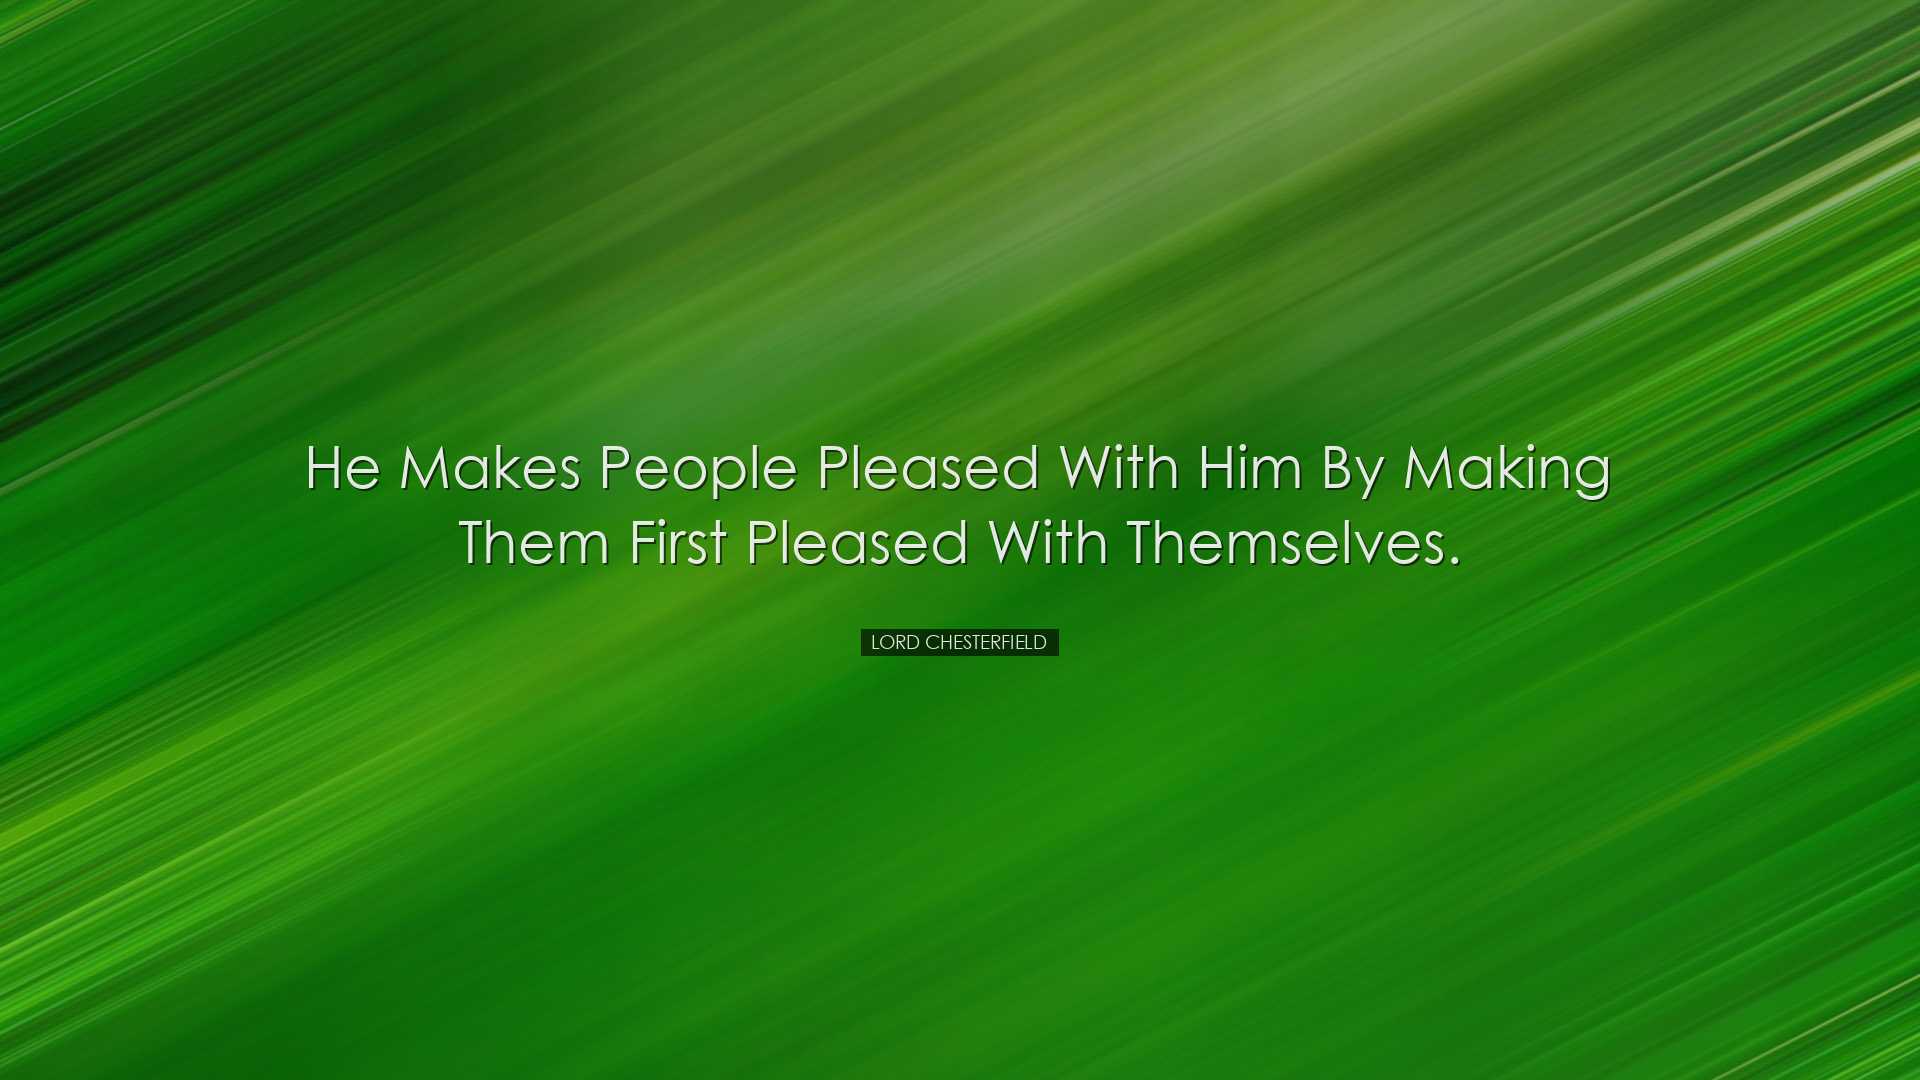 He makes people pleased with him by making them first pleased with